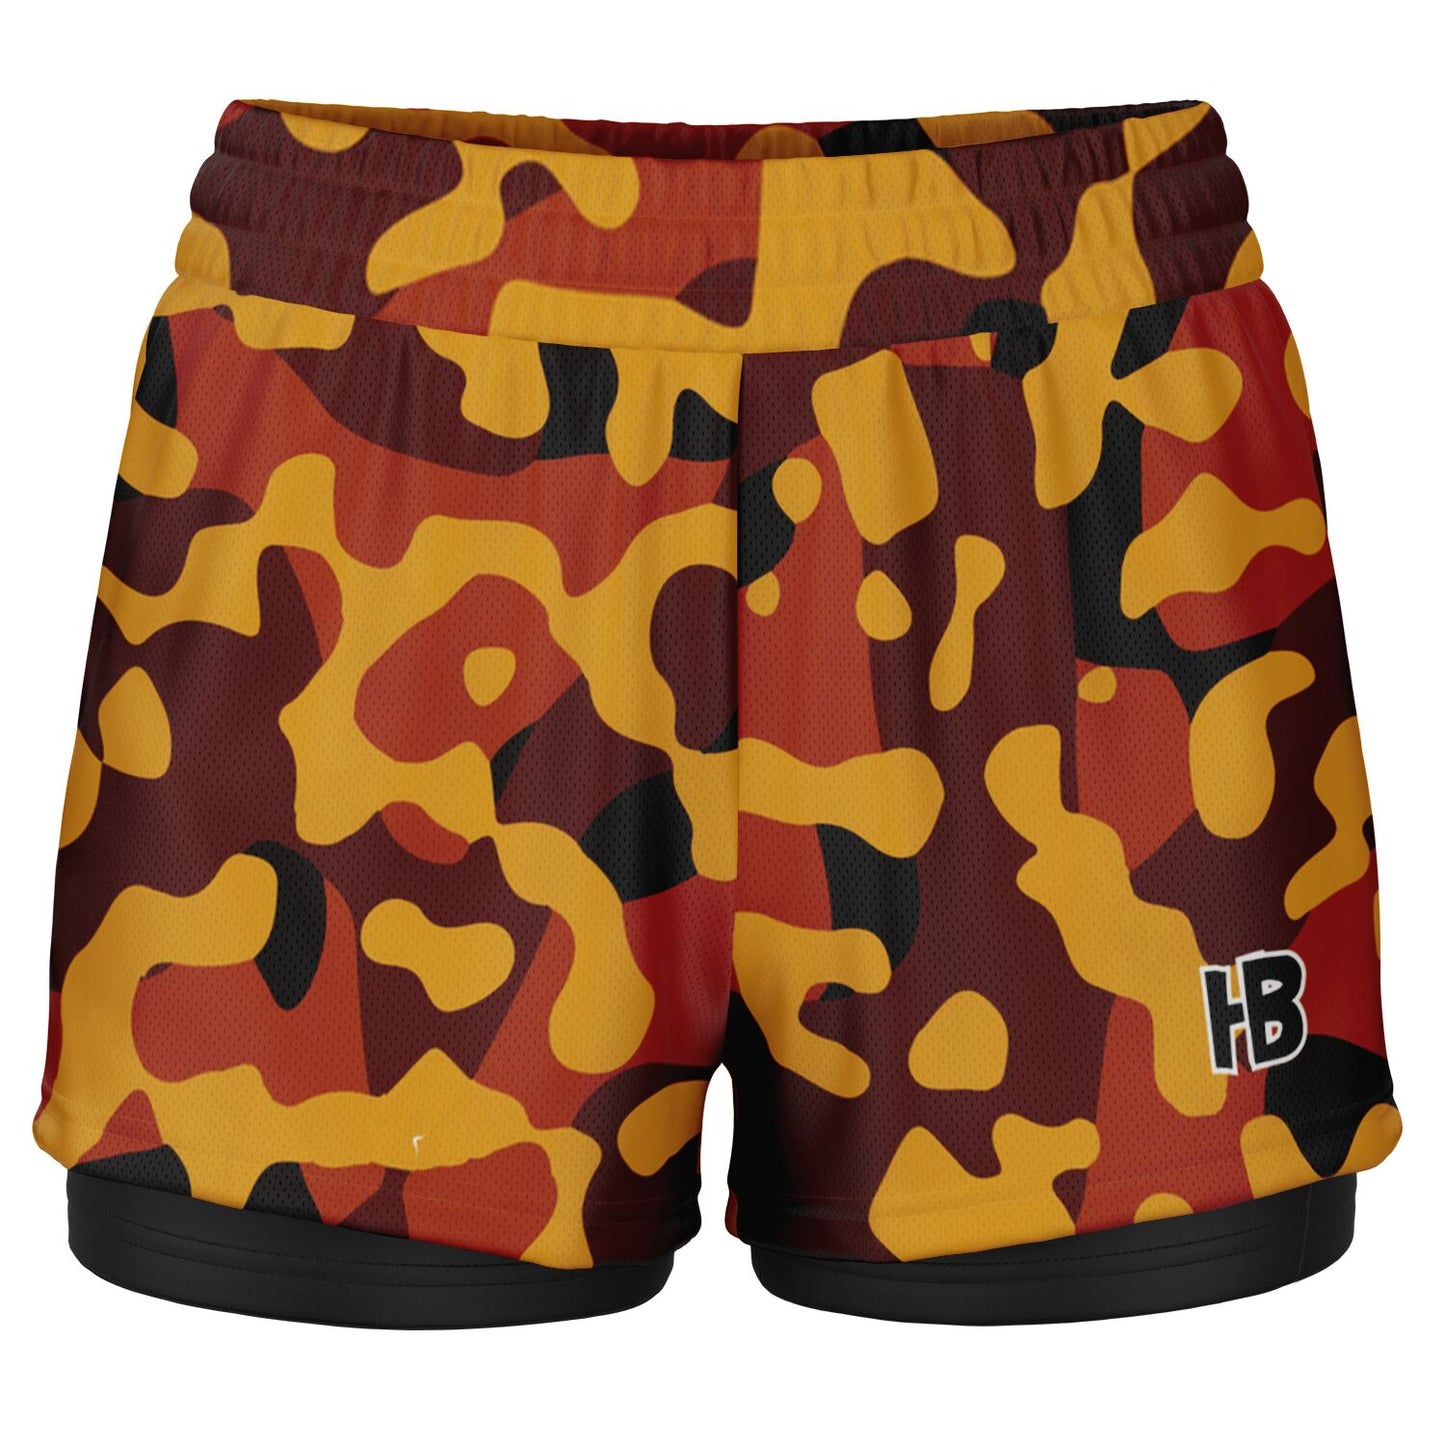 ReDy PoP WoMeN'S AnD mEnS cAmO 2 iN 1 sHoRts